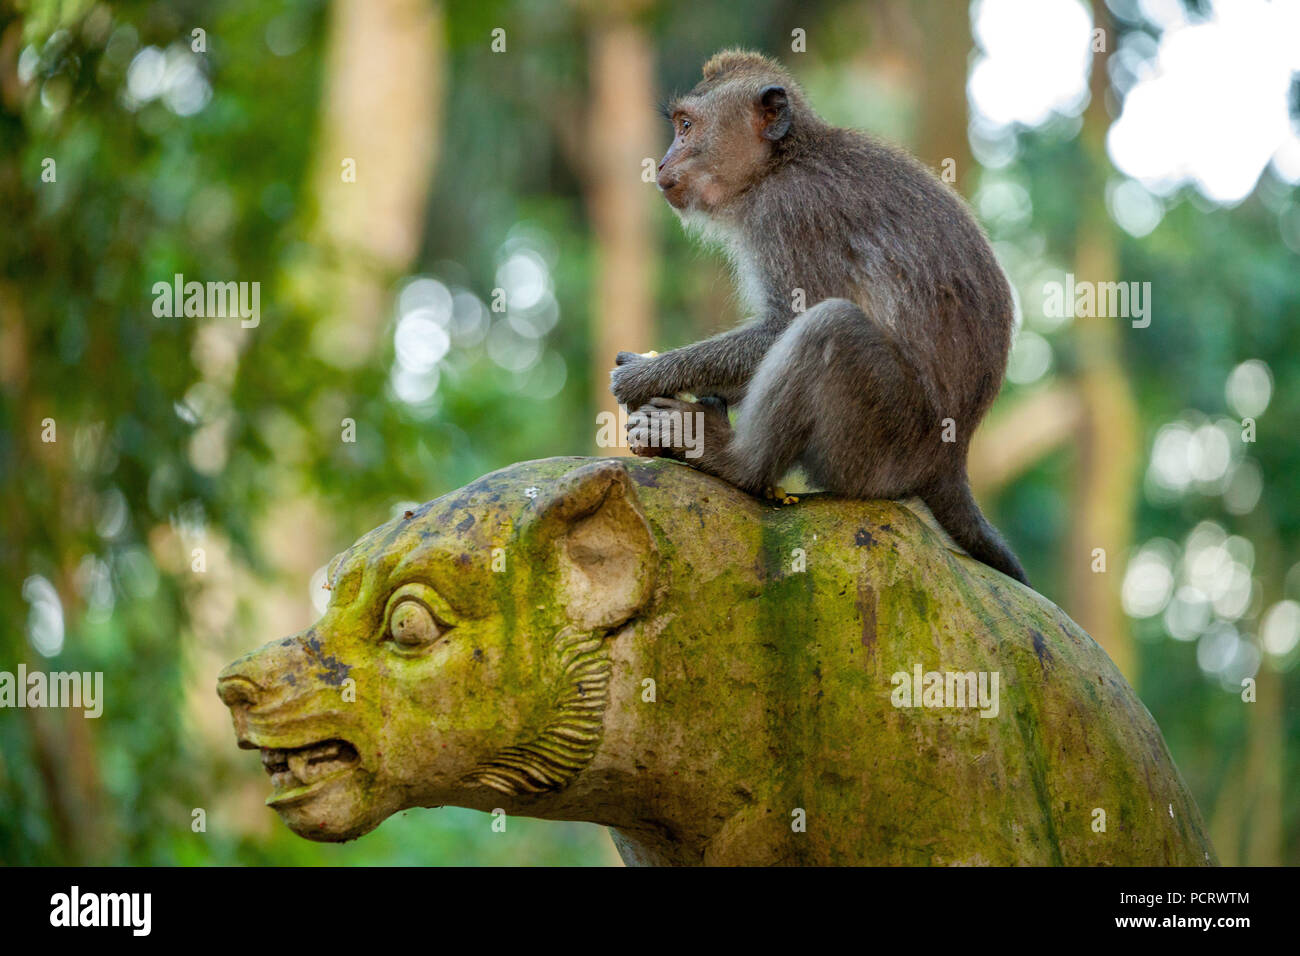 Long-tailed macaque (Macaca fascicularis), monkey sits on a stone figure, stone head with green moss coating, monkey forest of Ubud, Sacred Monkey Forest Sanctuary, Padangtegal, Ubud, Bali, Indonesia, Asia Stock Photo